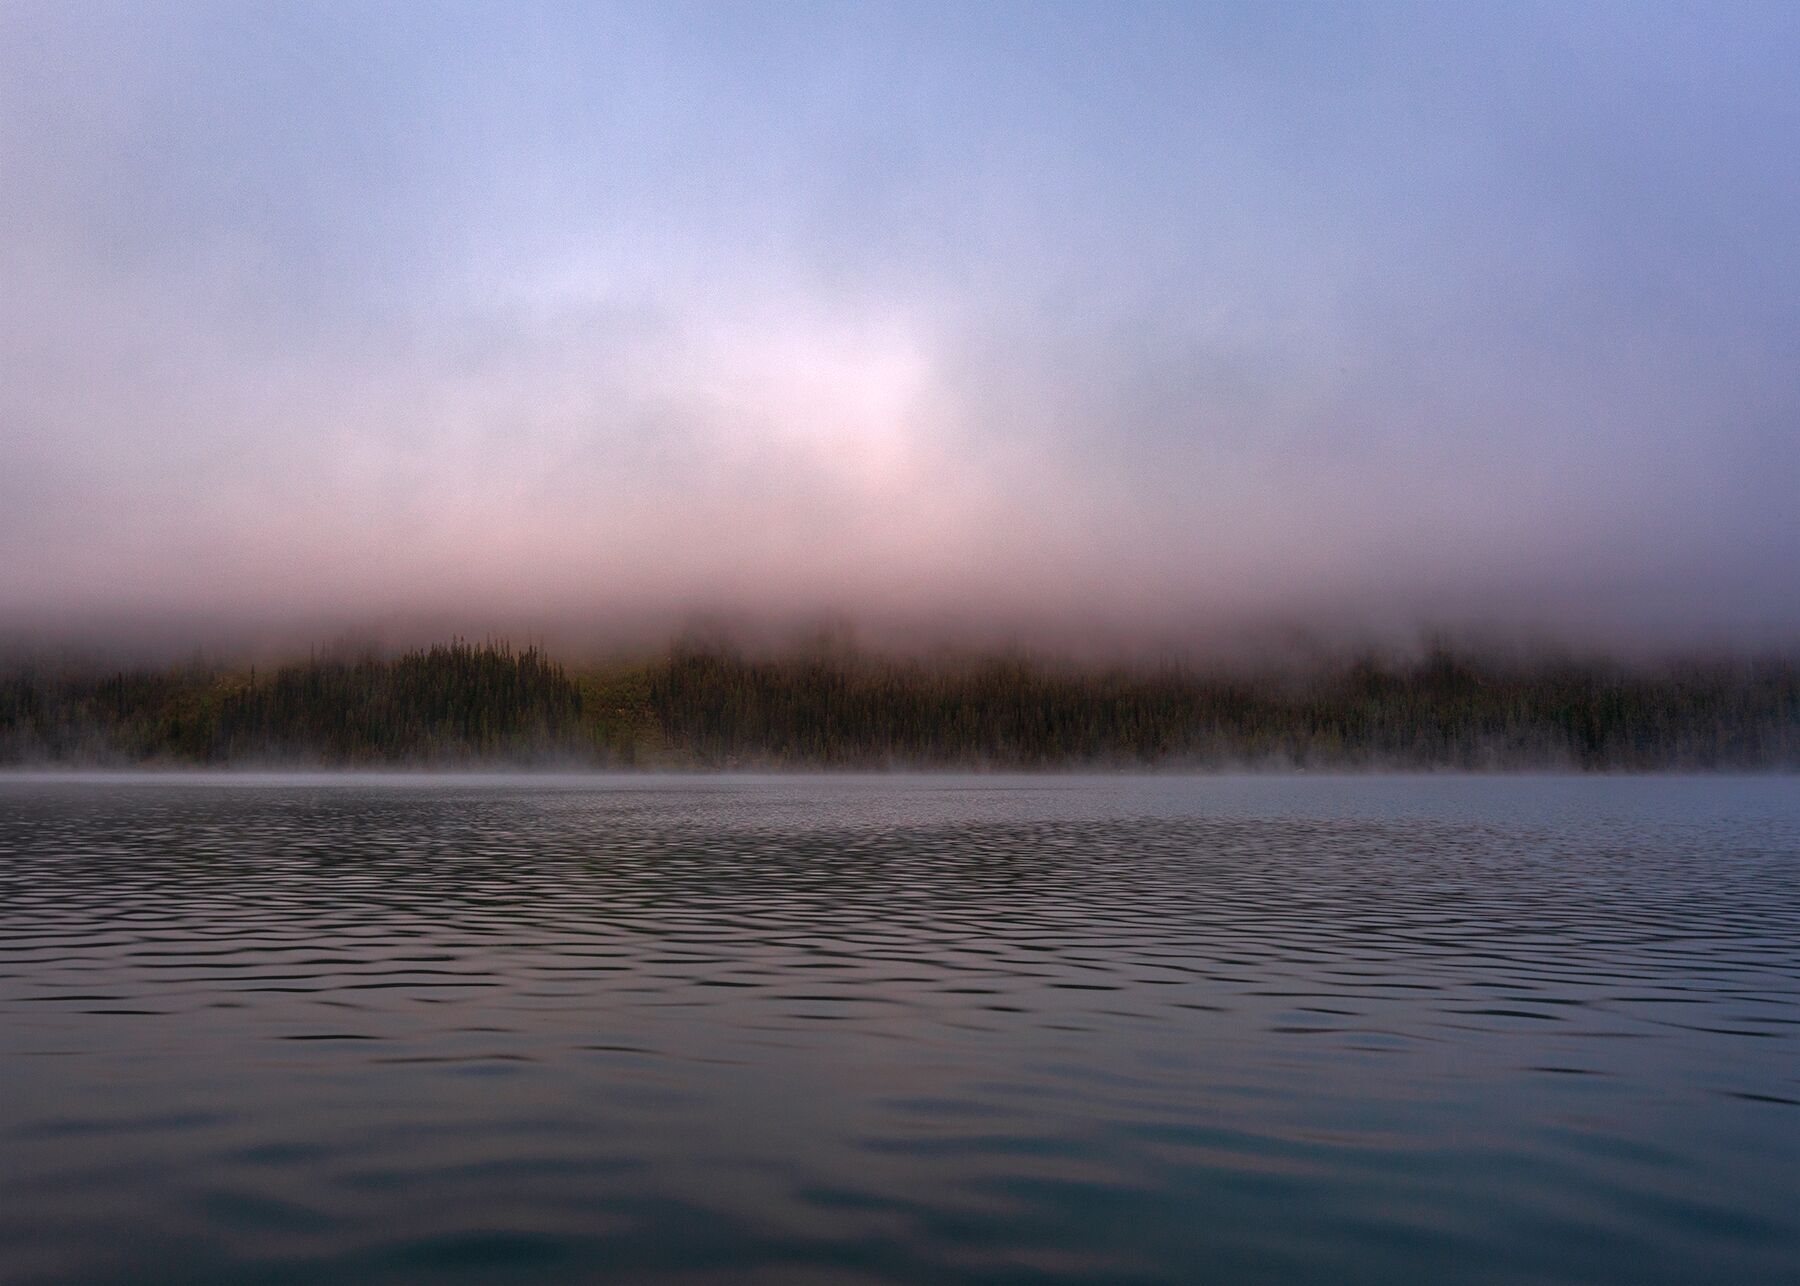 Fog hovers of the calm waters of Maligne Lake in Jasper National Park, Alberta, Canada